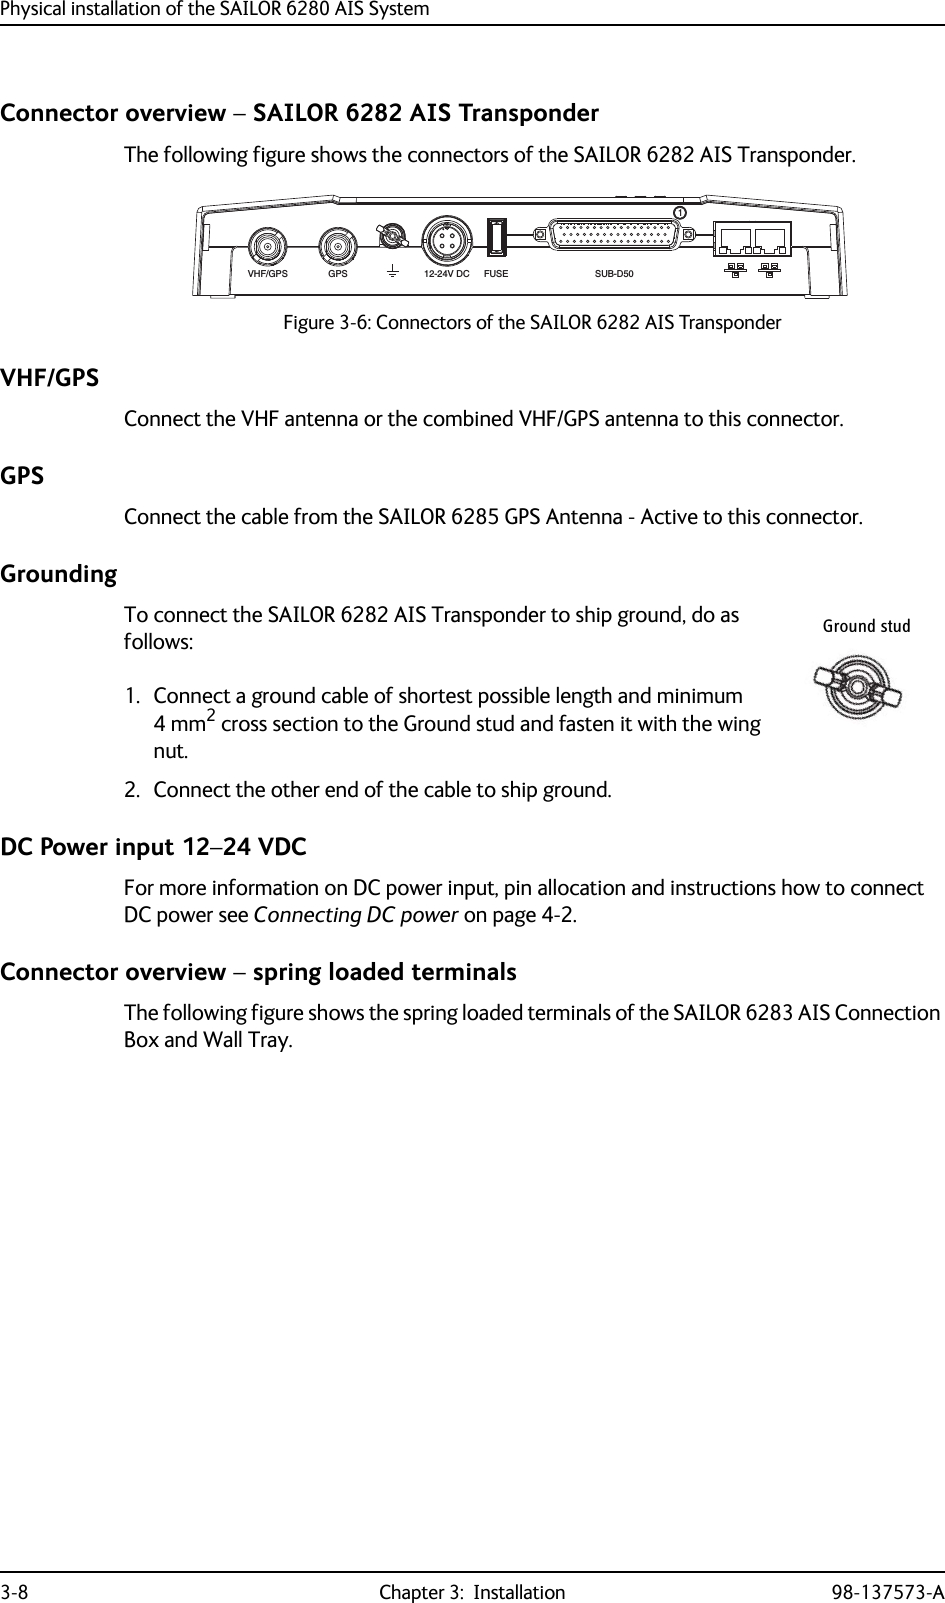 Physical installation of the SAILOR 6280 AIS System3-8 Chapter 3:  Installation 98-137573-AConnector overview – SAILOR 6282 AIS TransponderThe following figure shows the connectors of the SAILOR 6282 AIS Transponder.VHF/GPSConnect the VHF antenna or the combined VHF/GPS antenna to this connector.GPSConnect the cable from the SAILOR 6285 GPS Antenna - Active to this connector.GroundingTo connect the SAILOR 6282 AIS Transponder to ship ground, do as follows:1. Connect a ground cable of shortest possible length and minimum 4 mm2 cross section to the Ground stud and fasten it with the wing nut.2. Connect the other end of the cable to ship ground.DC Power input 12–24 VDCFor more information on DC power input, pin allocation and instructions how to connect DC power see Connecting DC power on page 4-2.Connector overview – spring loaded terminalsThe following figure shows the spring loaded terminals of the SAILOR 6283 AIS Connection Box and Wall Tray.Figure 3-6: Connectors of the SAILOR 6282 AIS TransponderVHF/GPSGPS12-24V DCFUSESUB-D501Ground stud